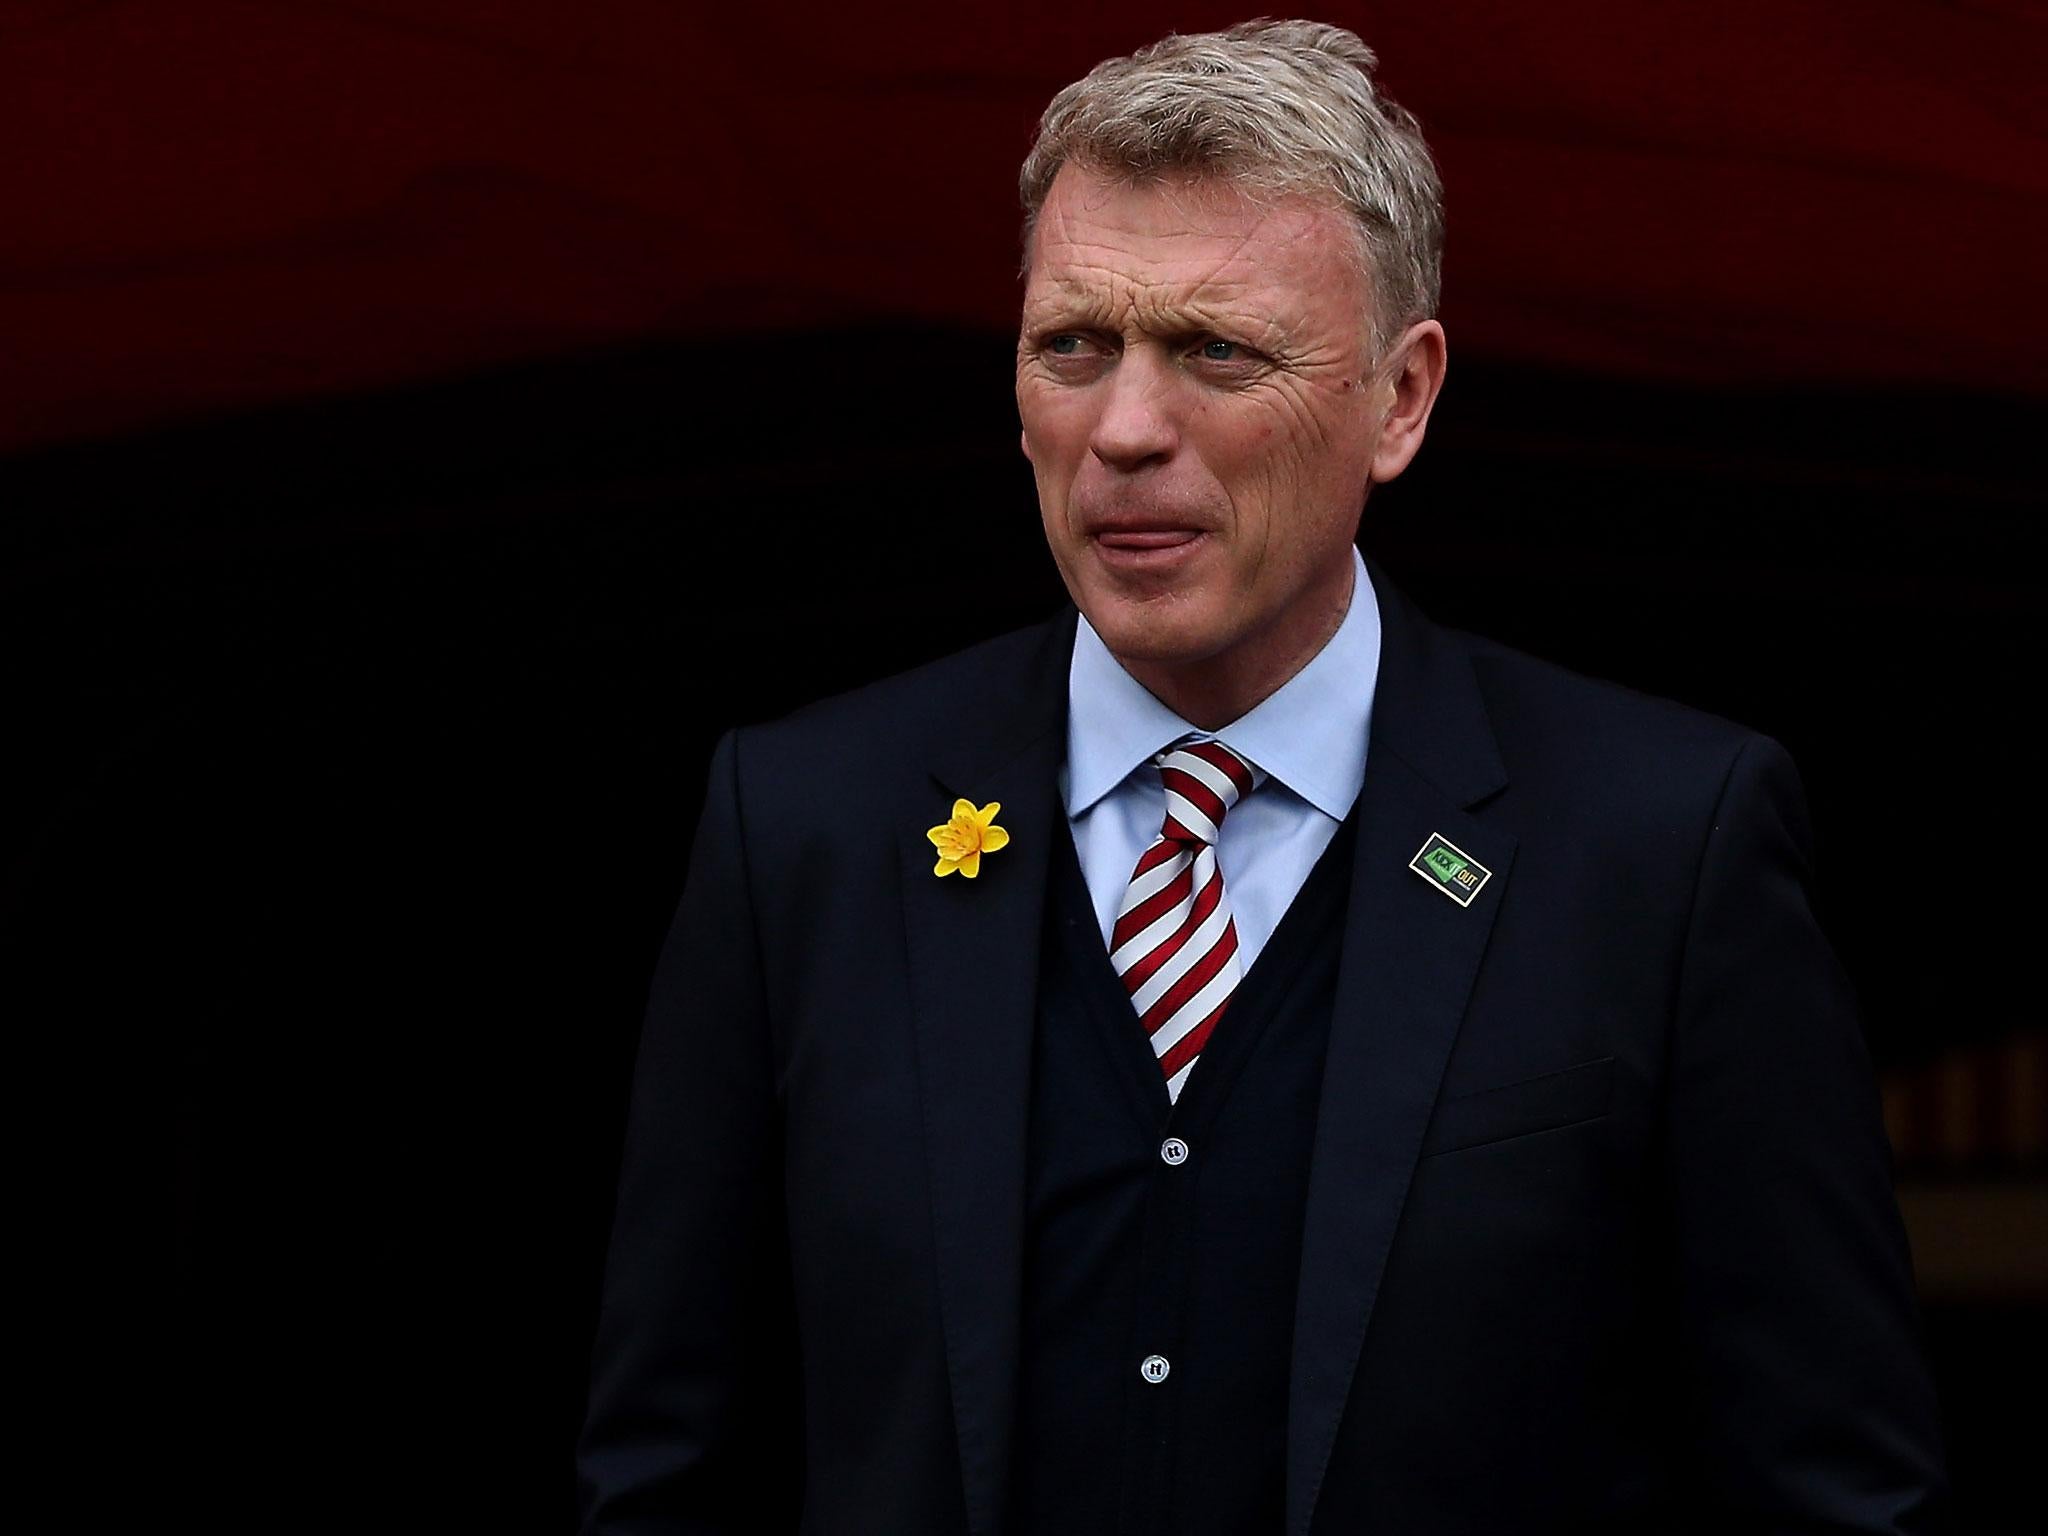 David Moyes's comments have been criticised by the chairman of the FA